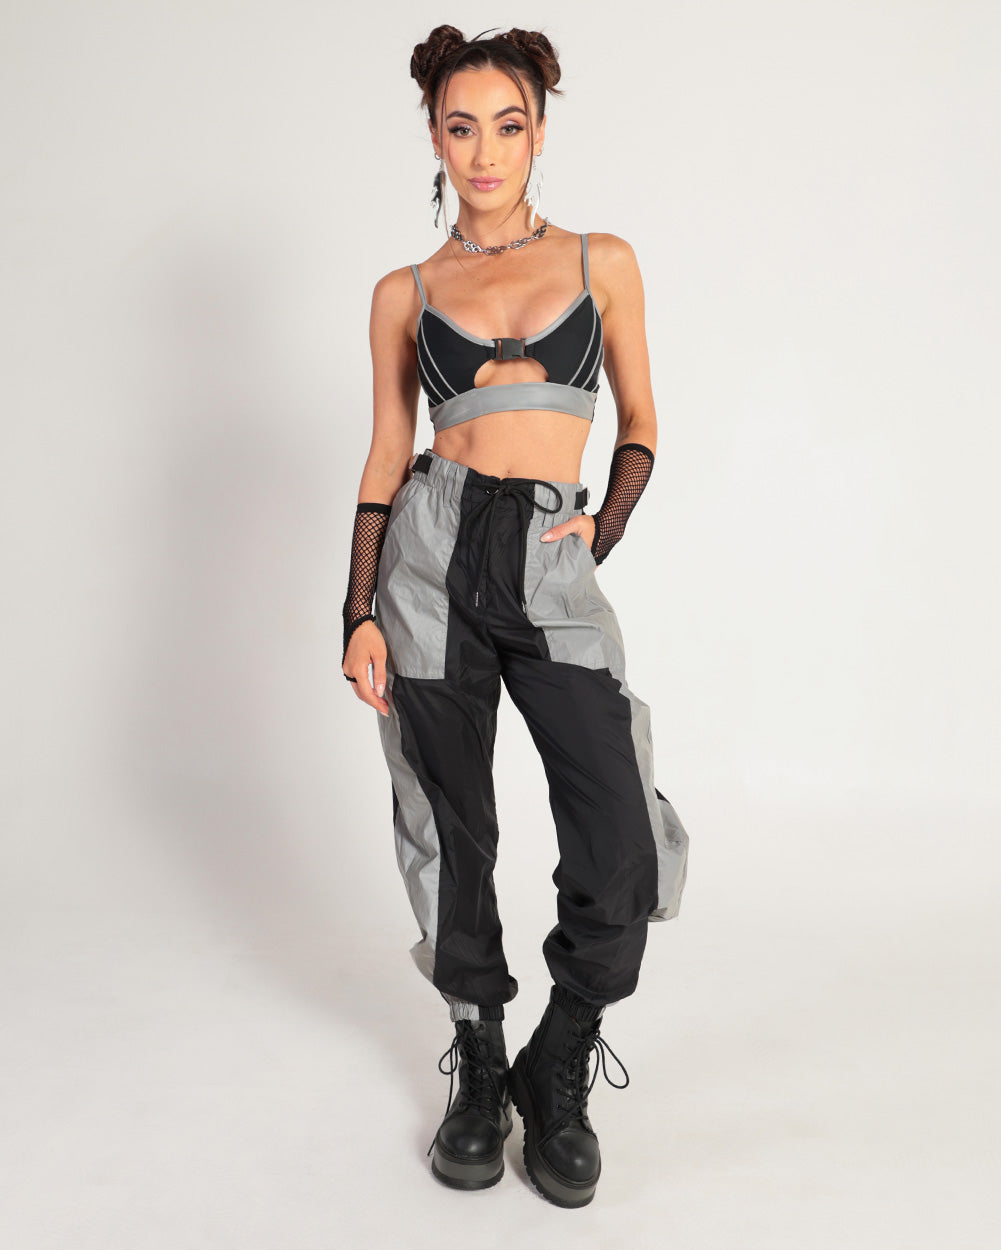 Thunder Shock Reflective Speed Clasp Crop Top-Black/Silver-Full--Hannah---S